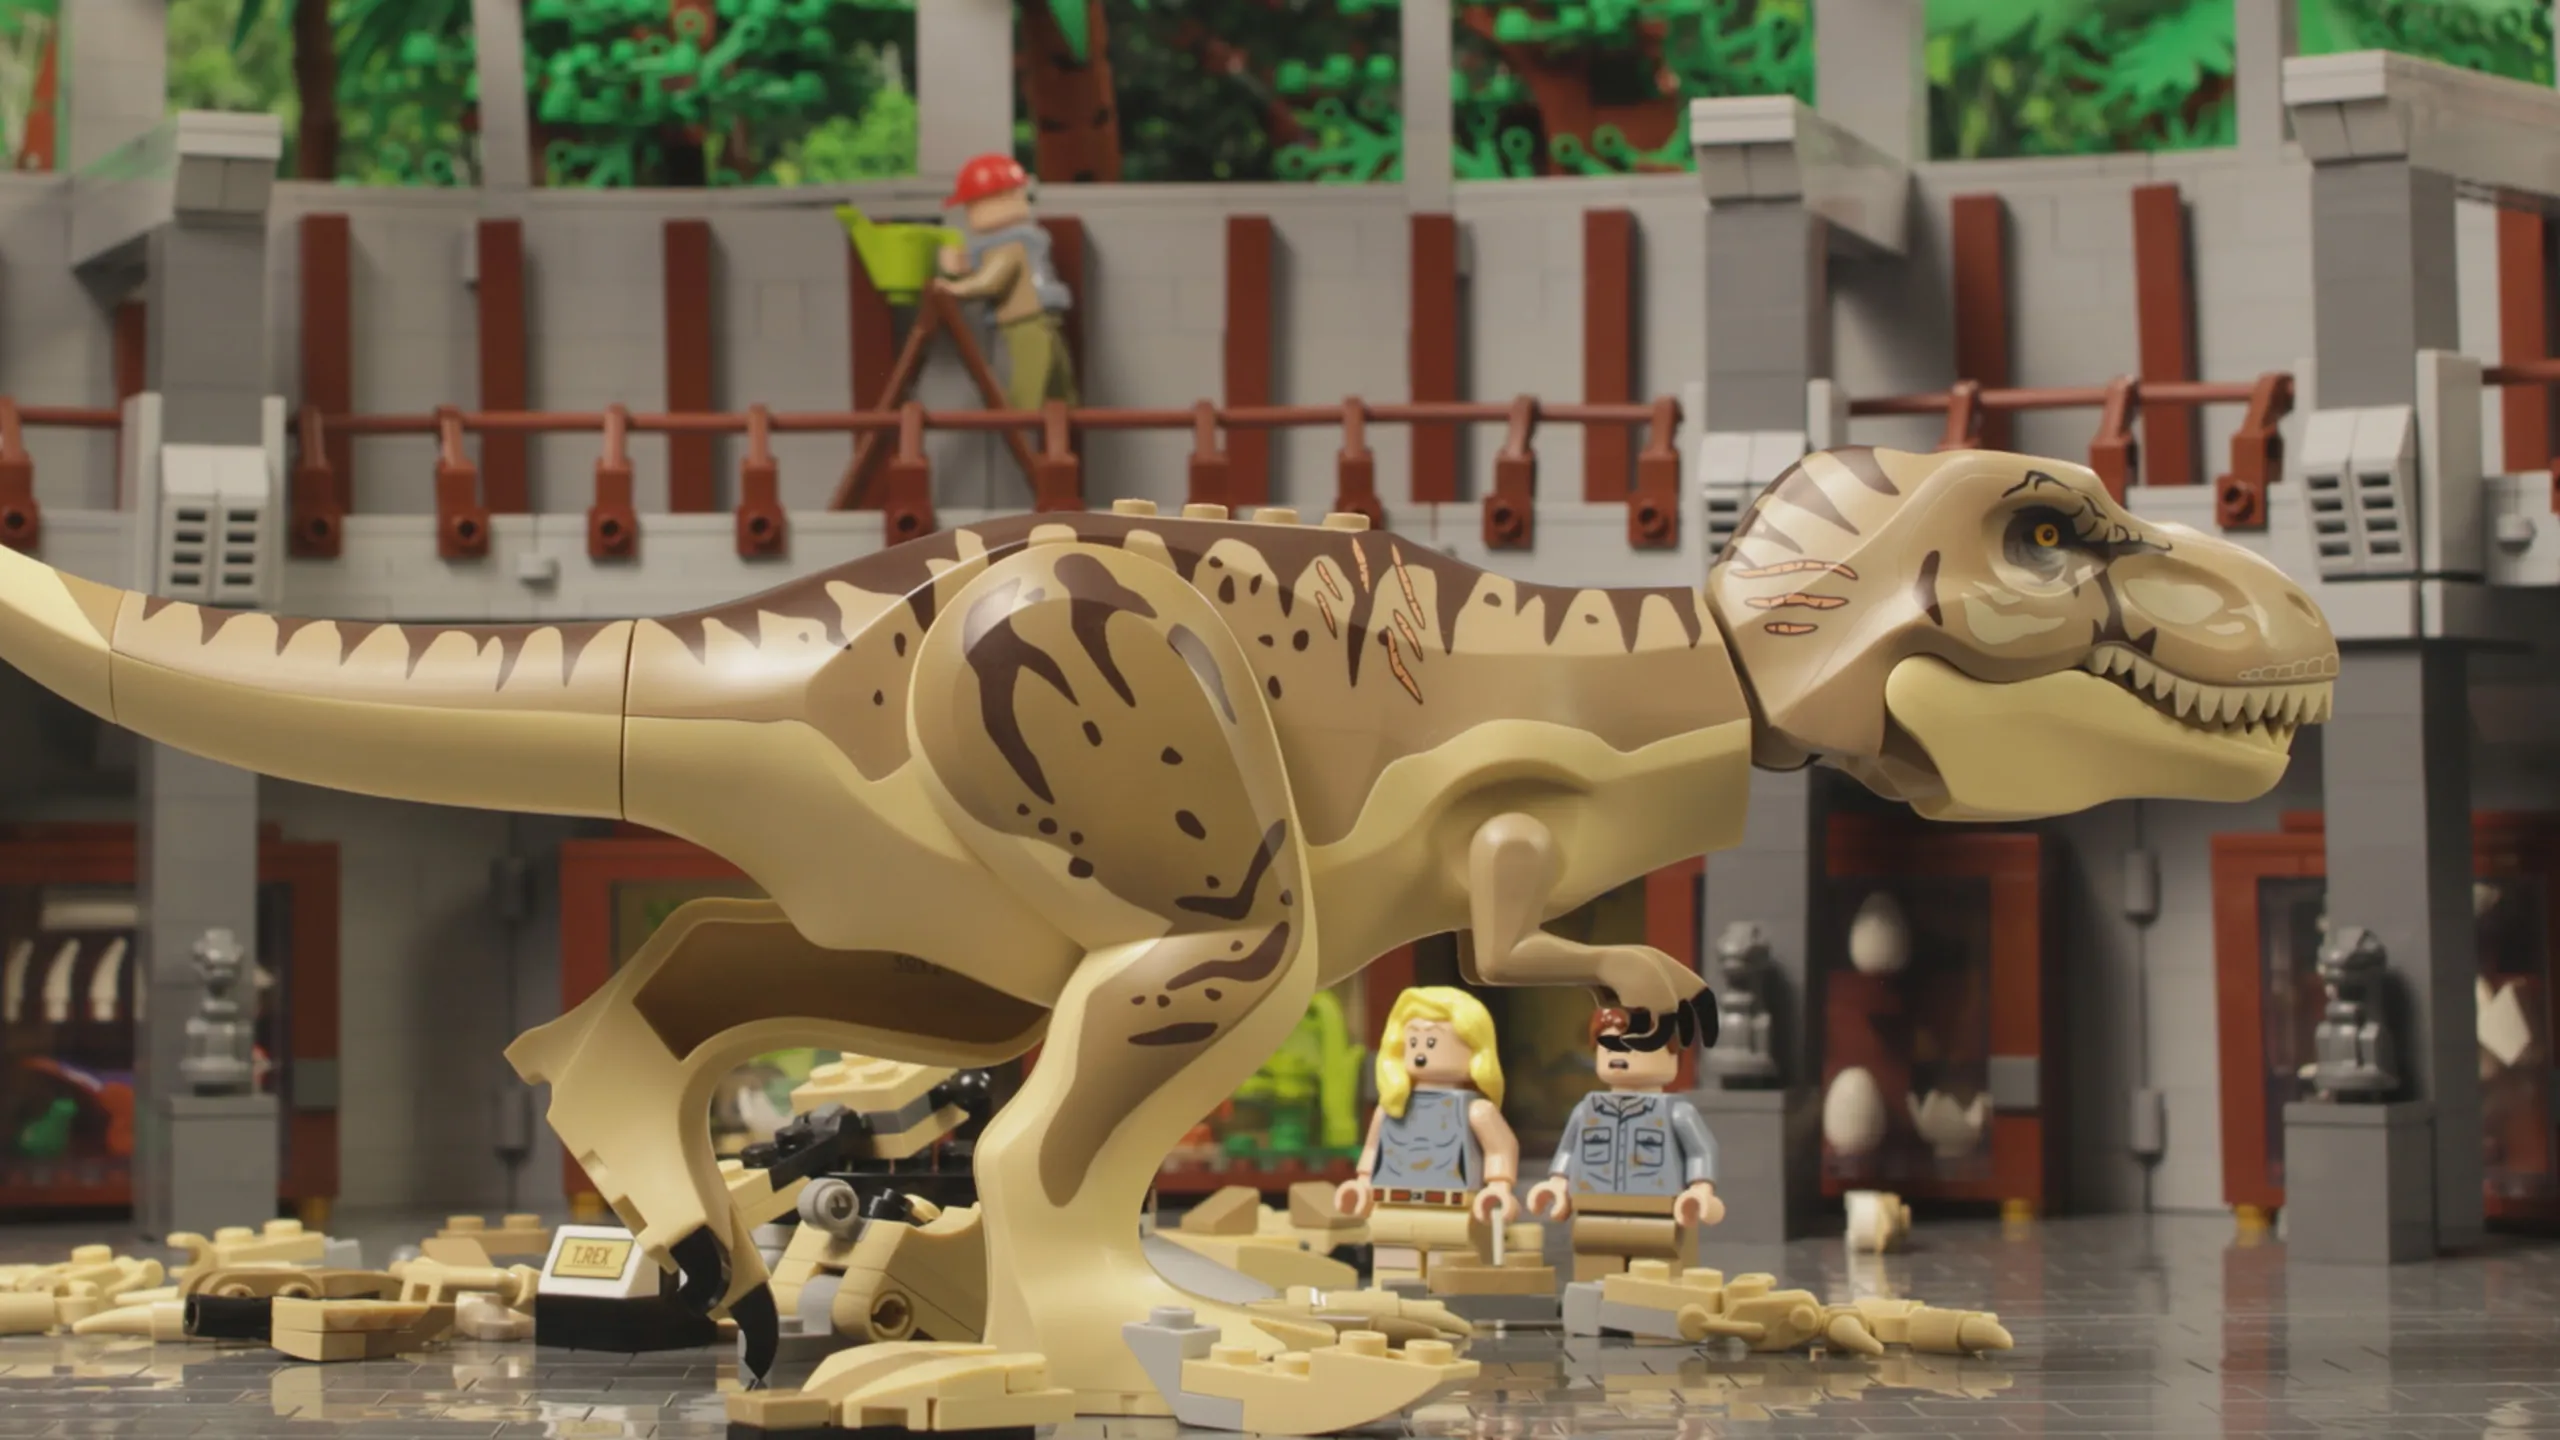 Lego Jurassic World Build Your Own Adventure - (lego Build Your